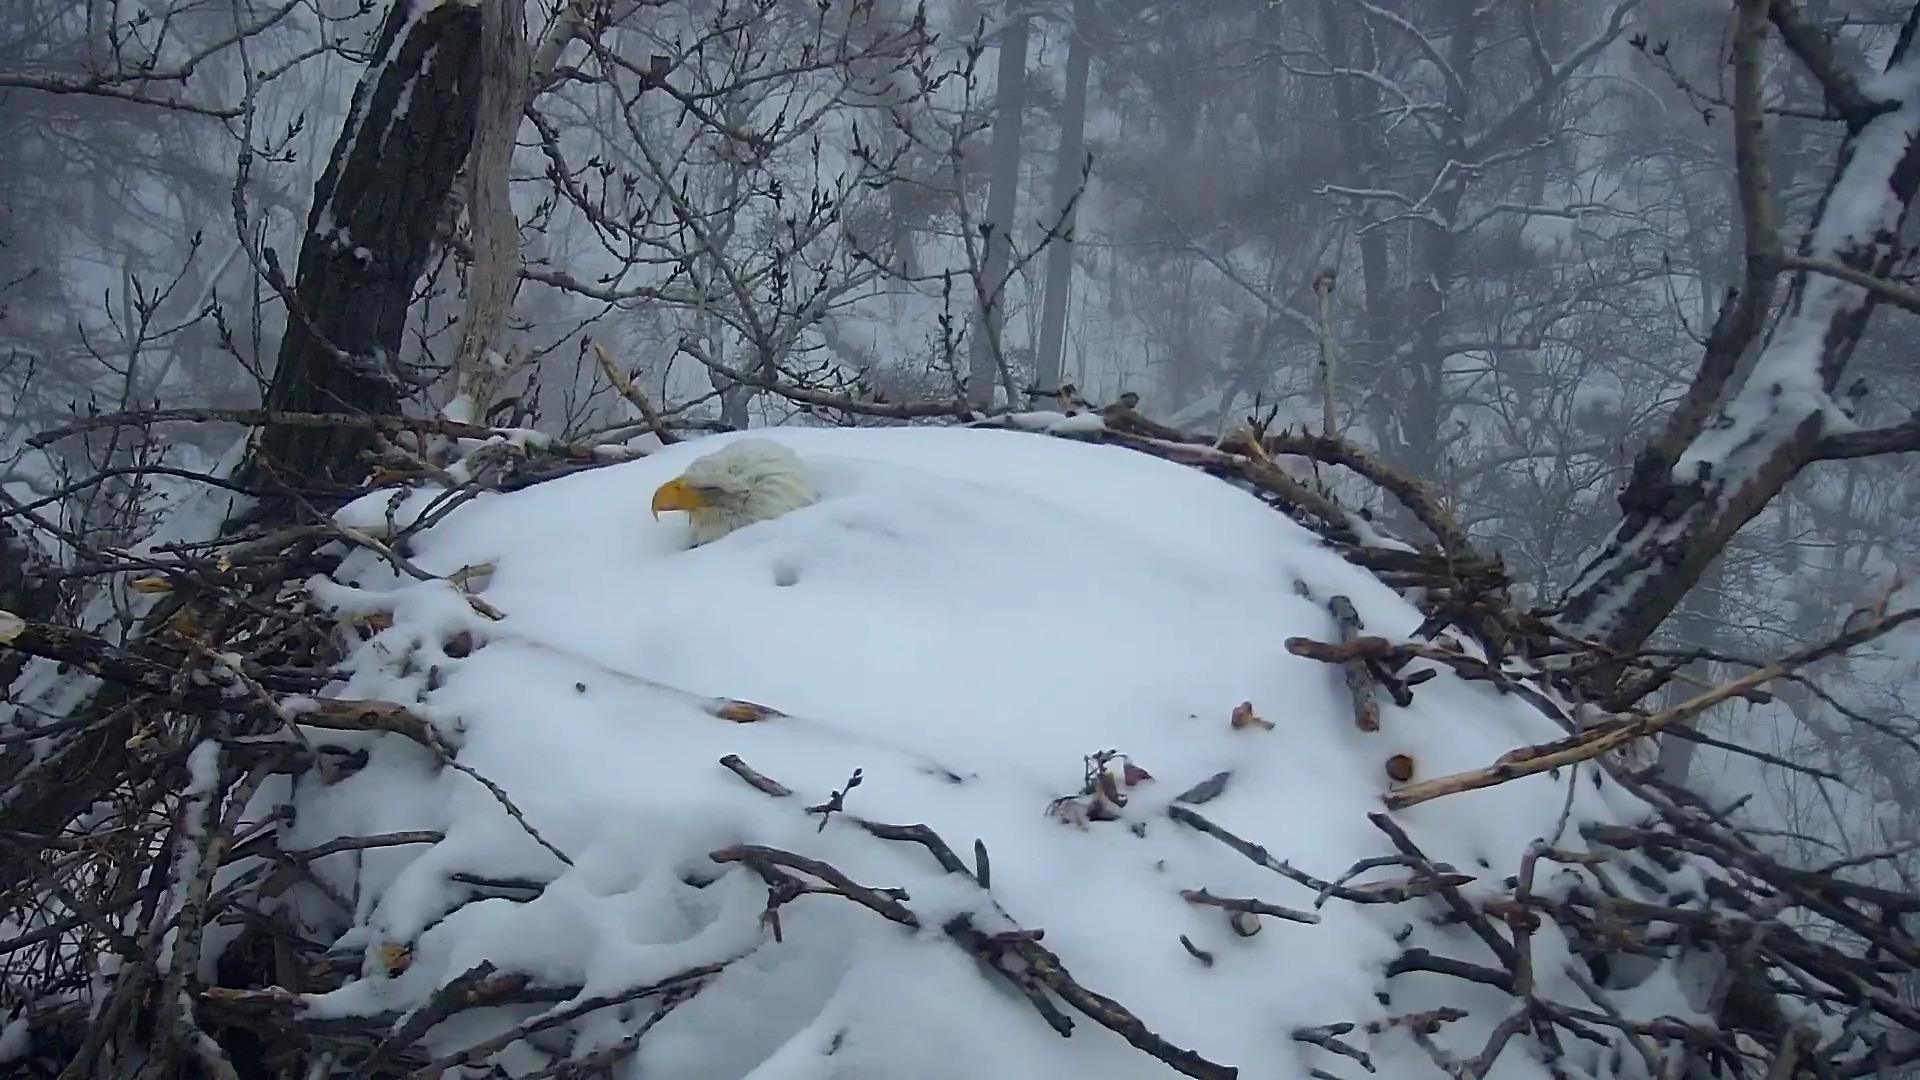 Webcam Captures Mama Bald Eagle Who Won’t Leave Nest Covered in Over Foot of Snow After Winter Storm